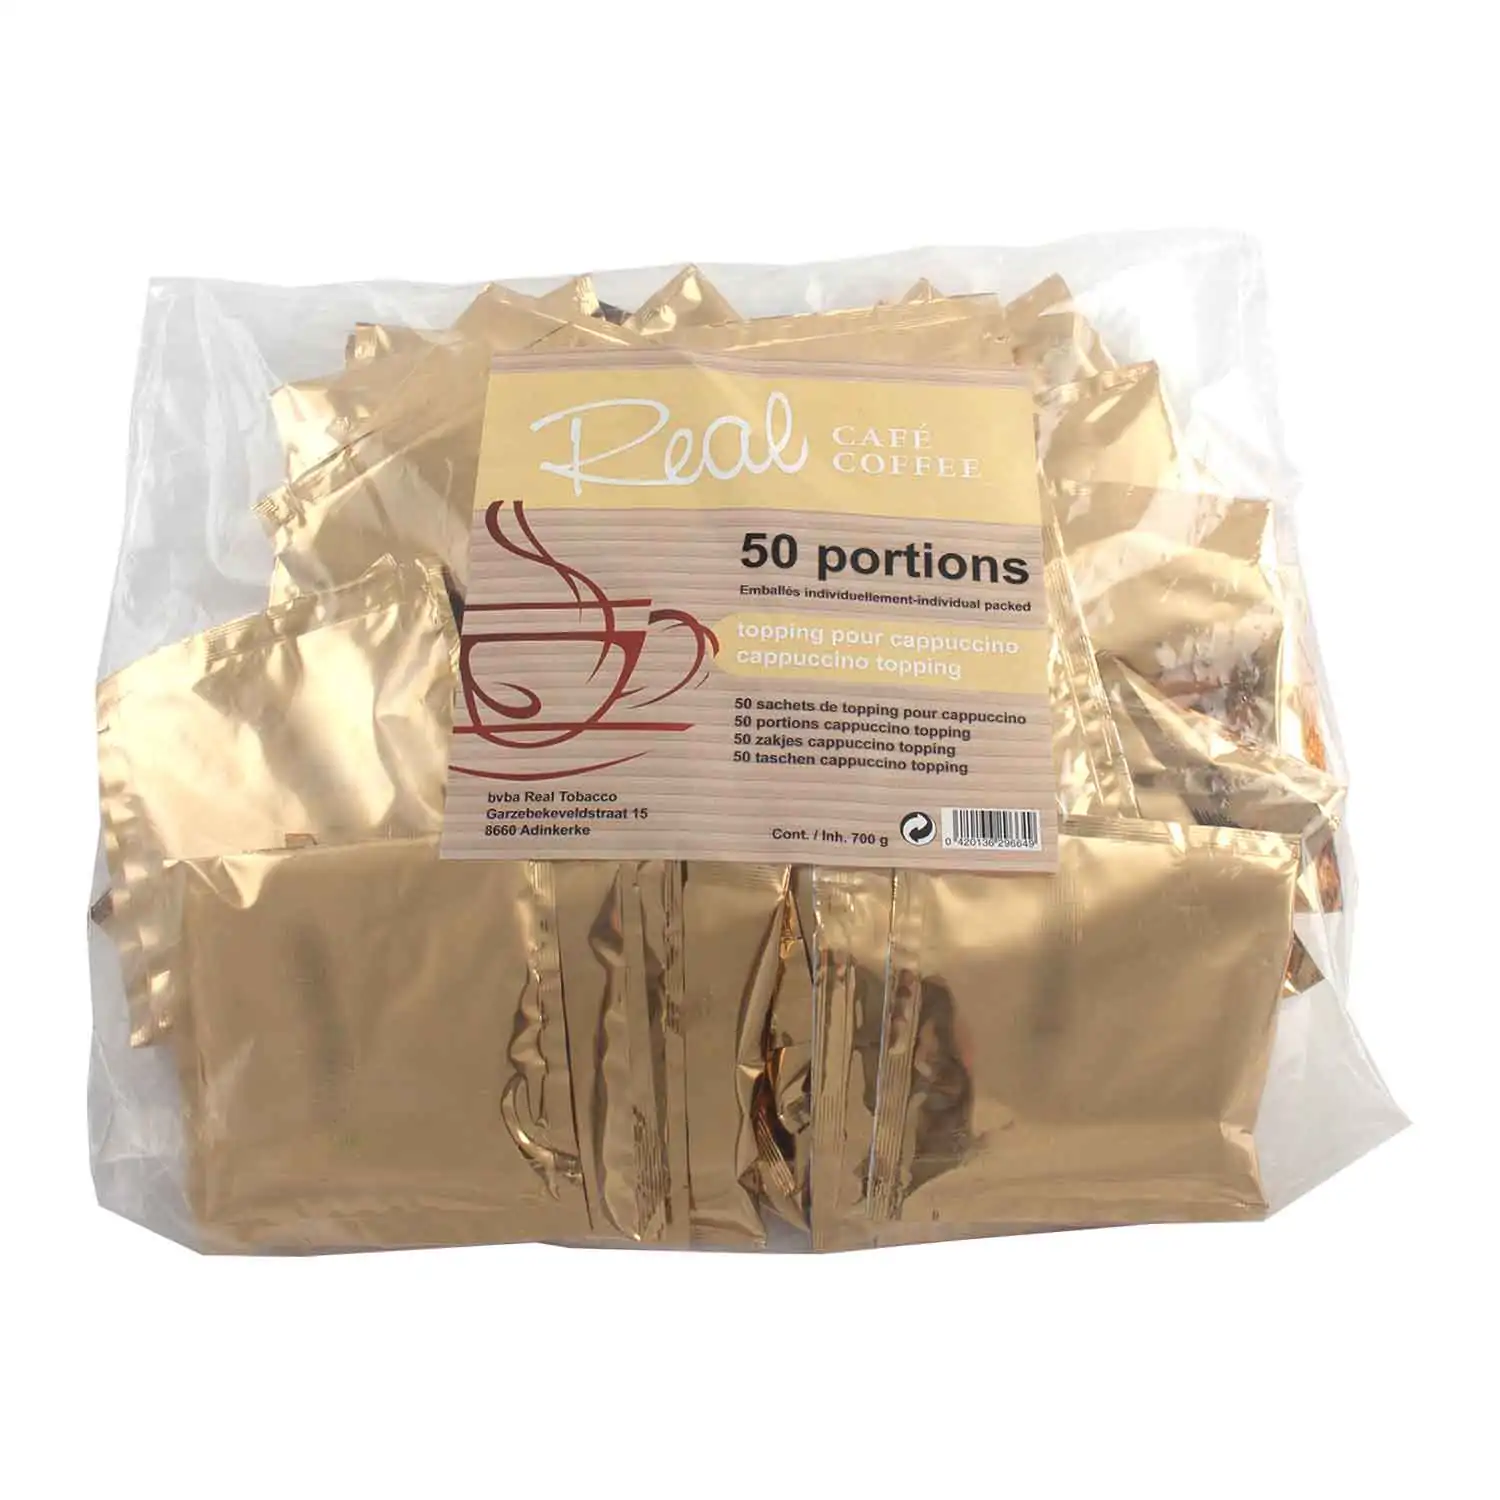 Real coffee cappuccino topping 50pcs - Buy at Real Tobacco